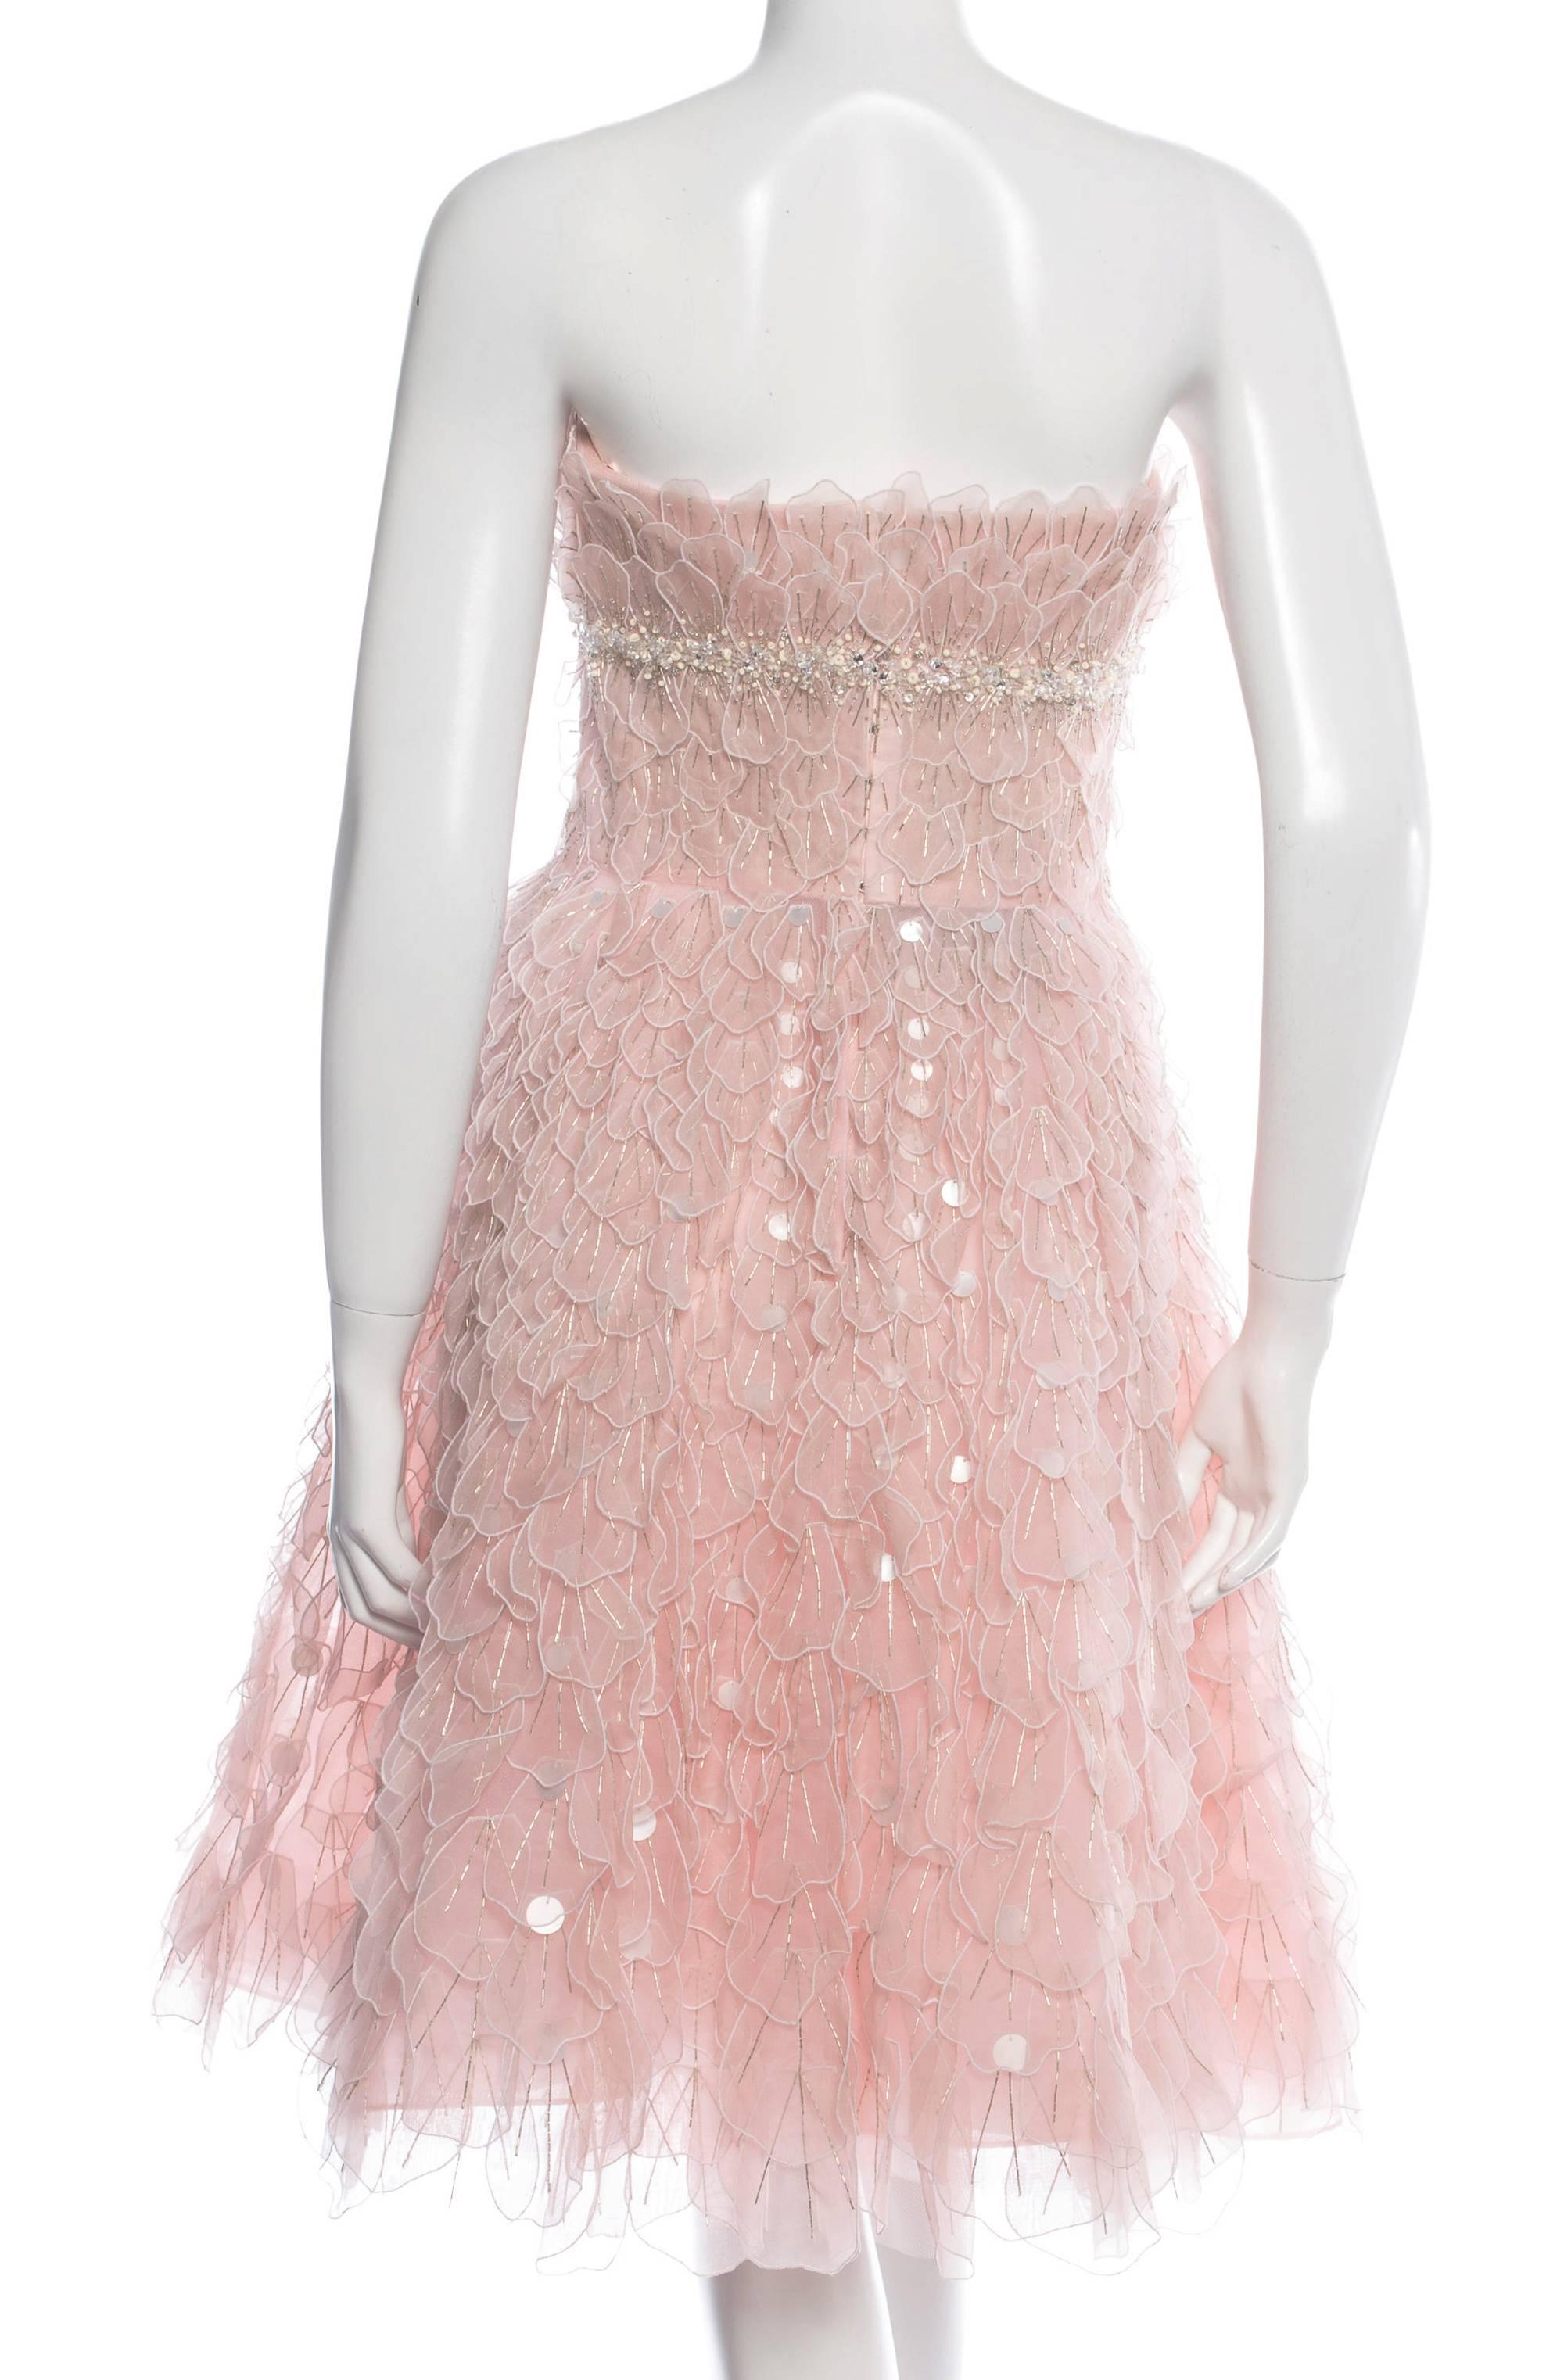 Oscar de la Renta is Unsurpassed in the Label's Elegant, Breathtaking Designs.
Pale Pink Bead-embellished Petals Appliques
Hand Beaded Trim Under the Bust
Boned Corset with a Bra Cups
Tulle and Crinoline Underlining
Rear Zip, Hook &